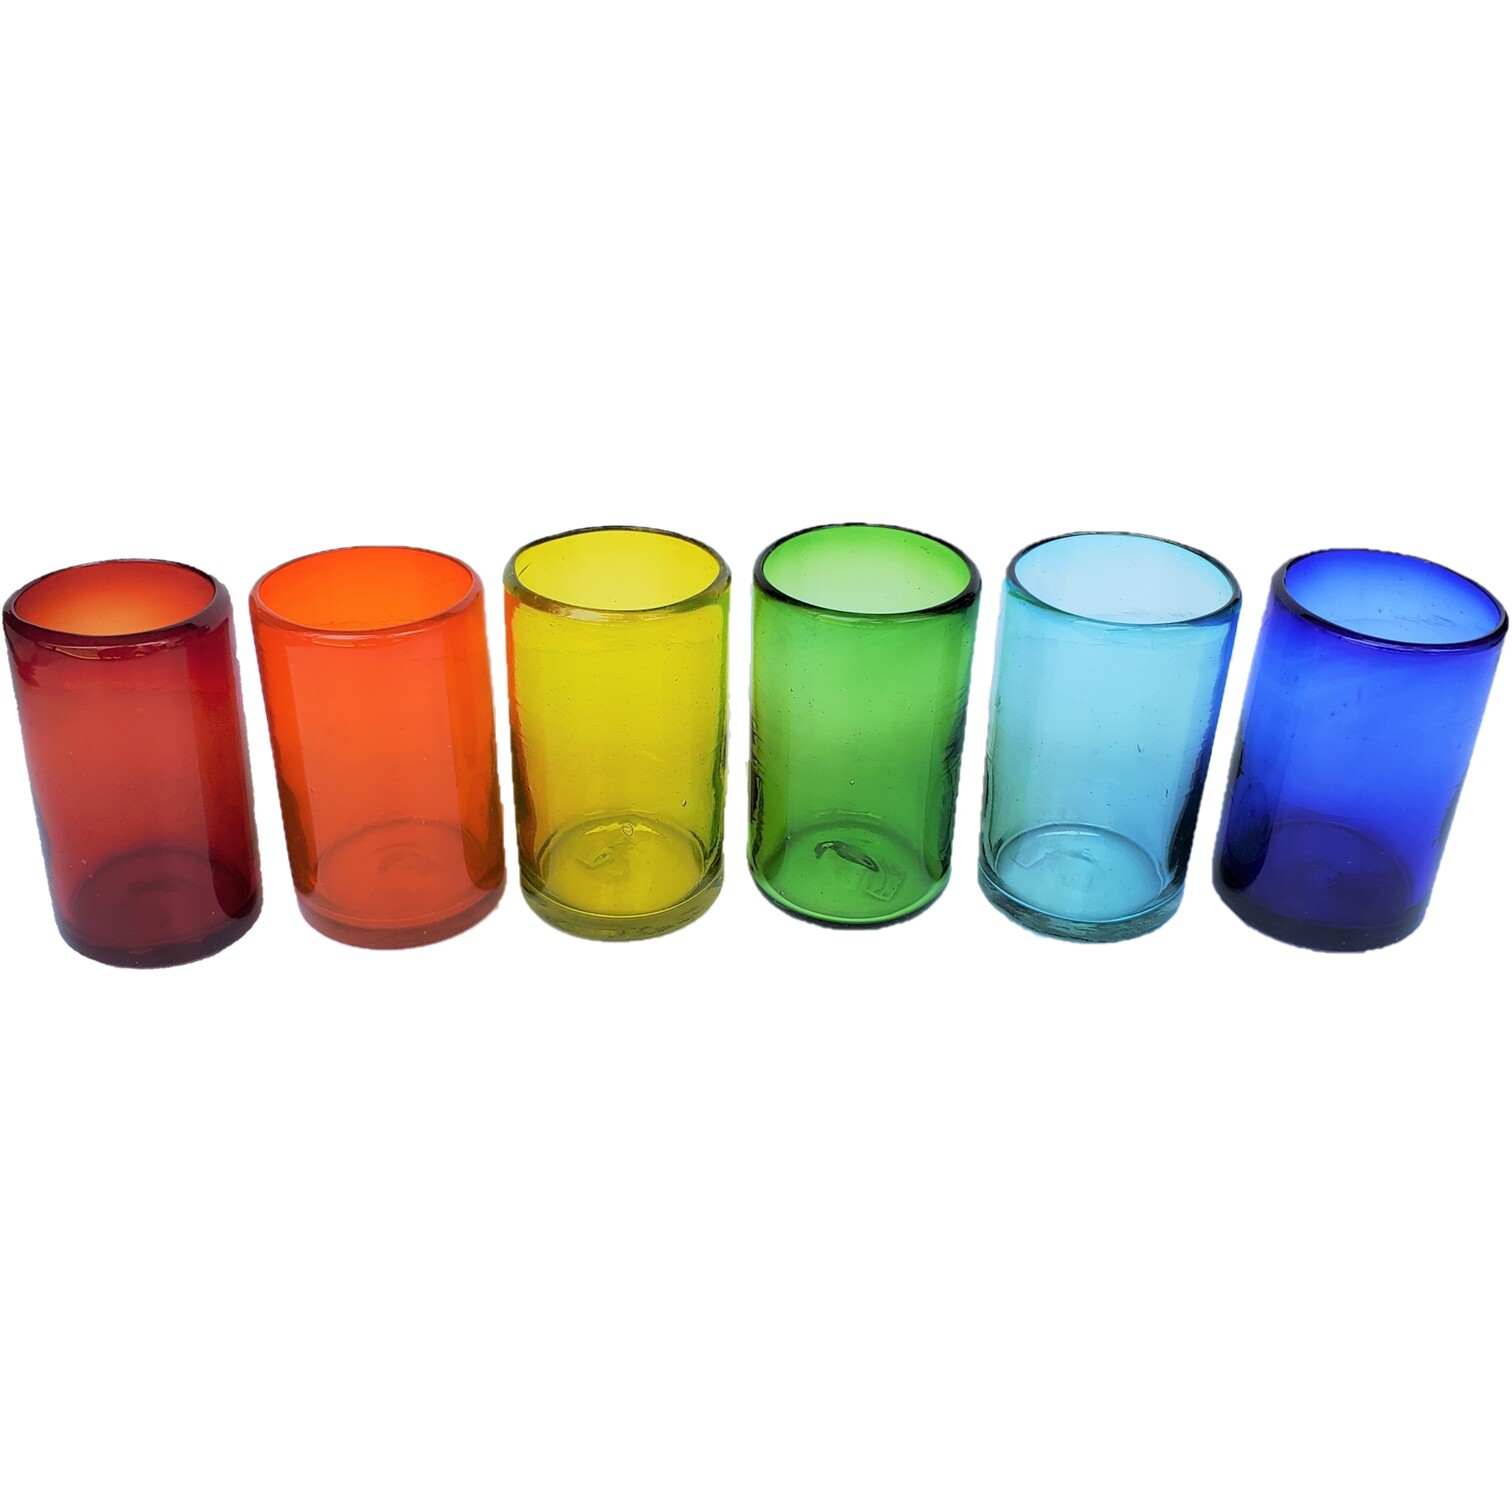 MEXICAN GLASSWARE / Rainbow Colored drinking glasses (set of 6) / These handcrafted glasses deliver a classic touch to your favorite drink.